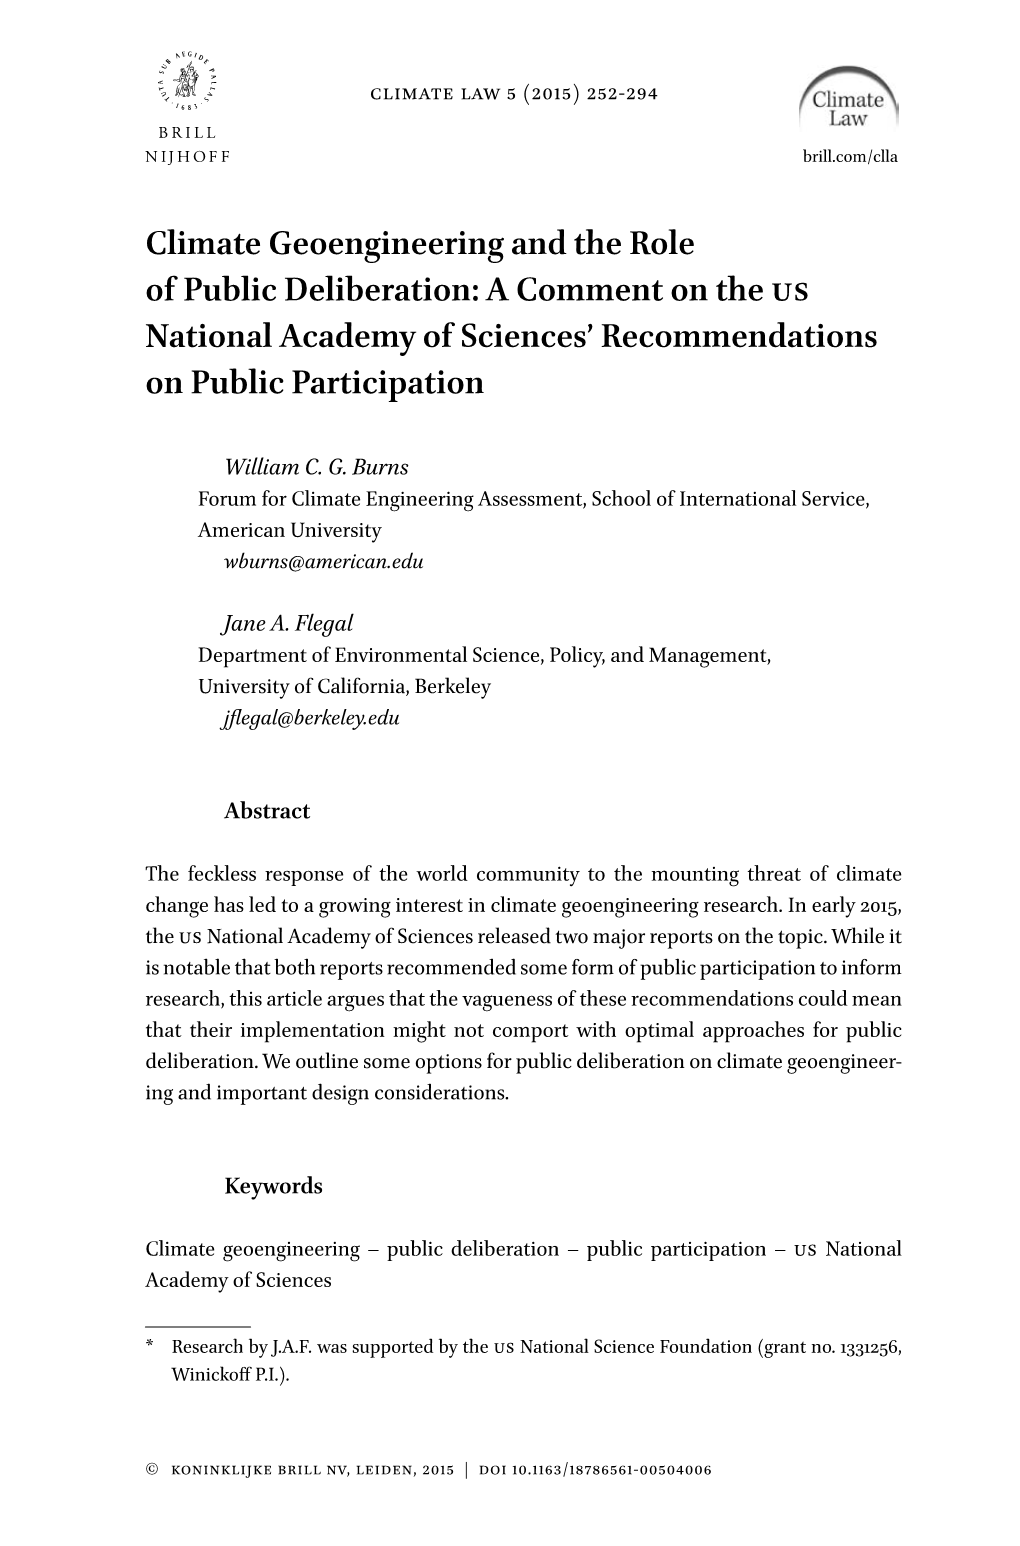 Climate Geoengineering and the Role of Public Deliberation: a Comment on the Us National Academy of Sciences’ Recommendations on Public Participation